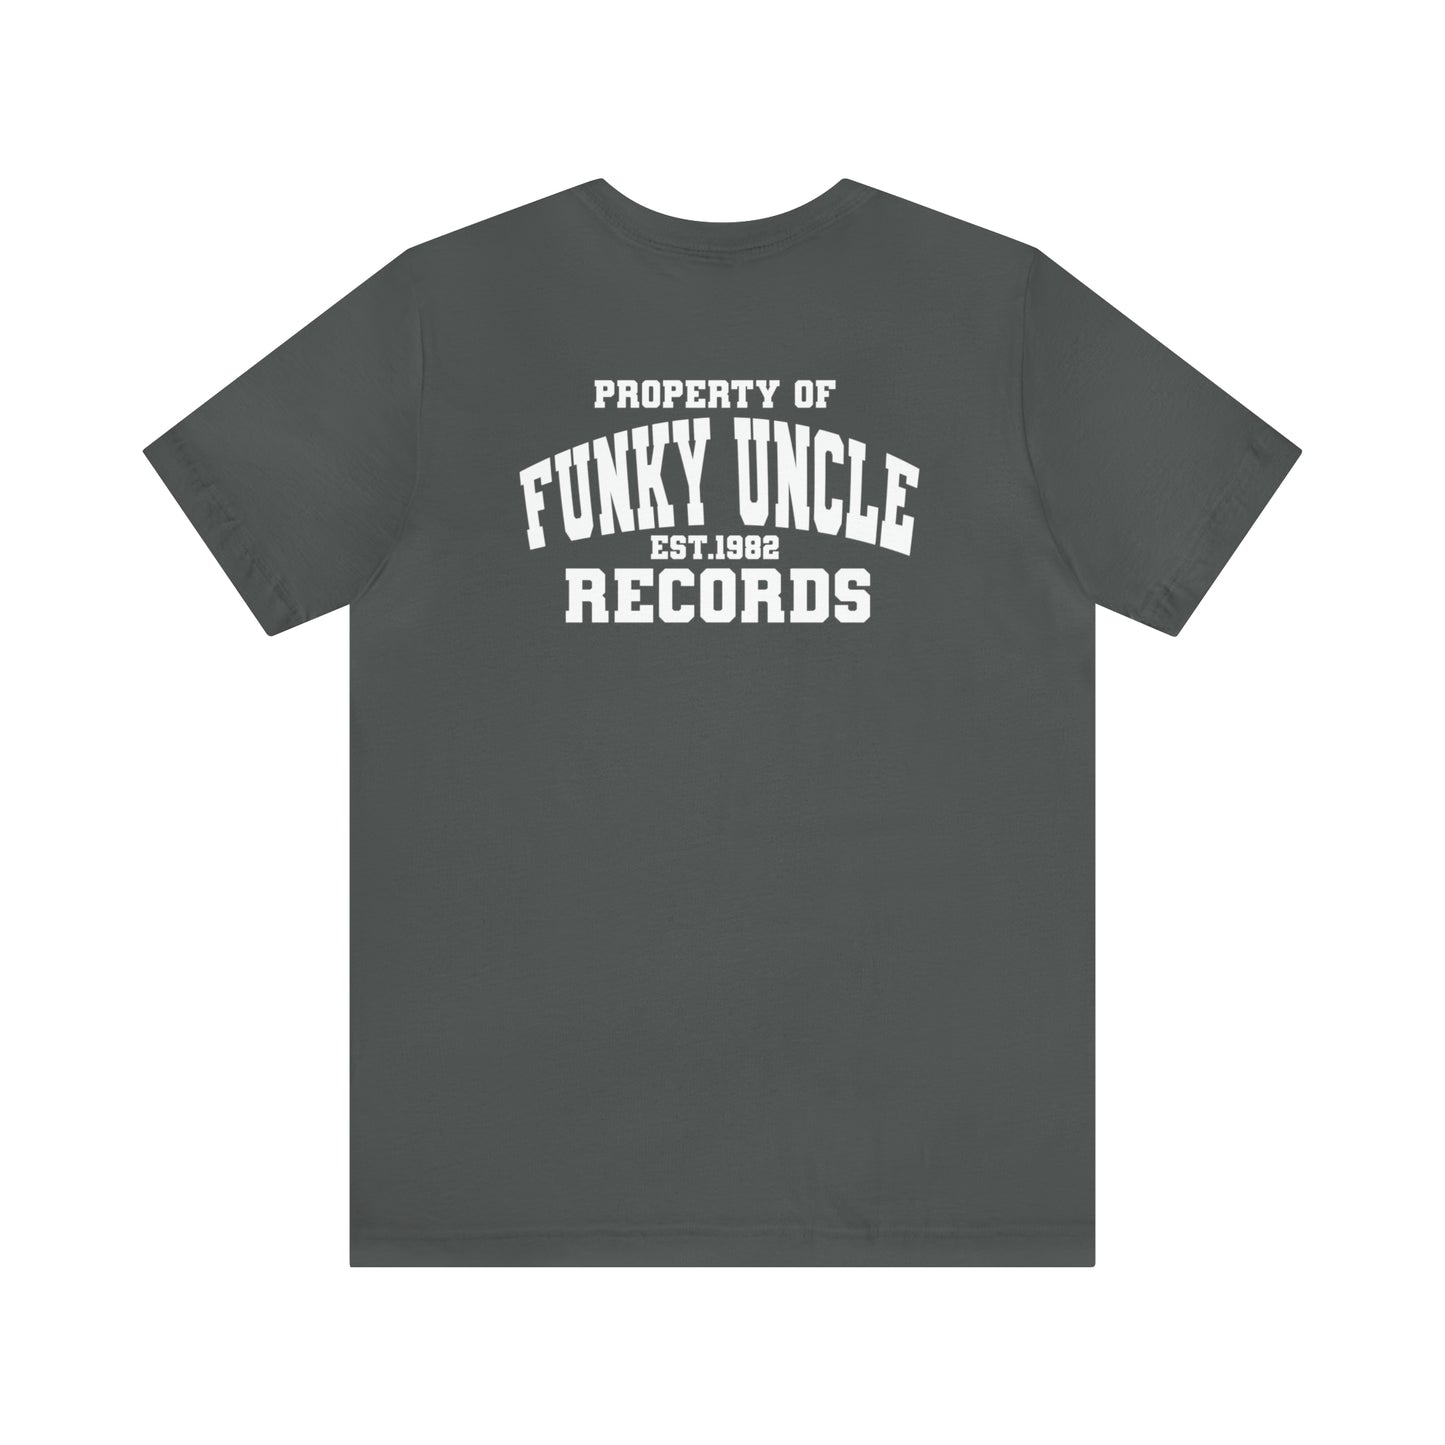 PROPERTY OF FUNKY UNCLE